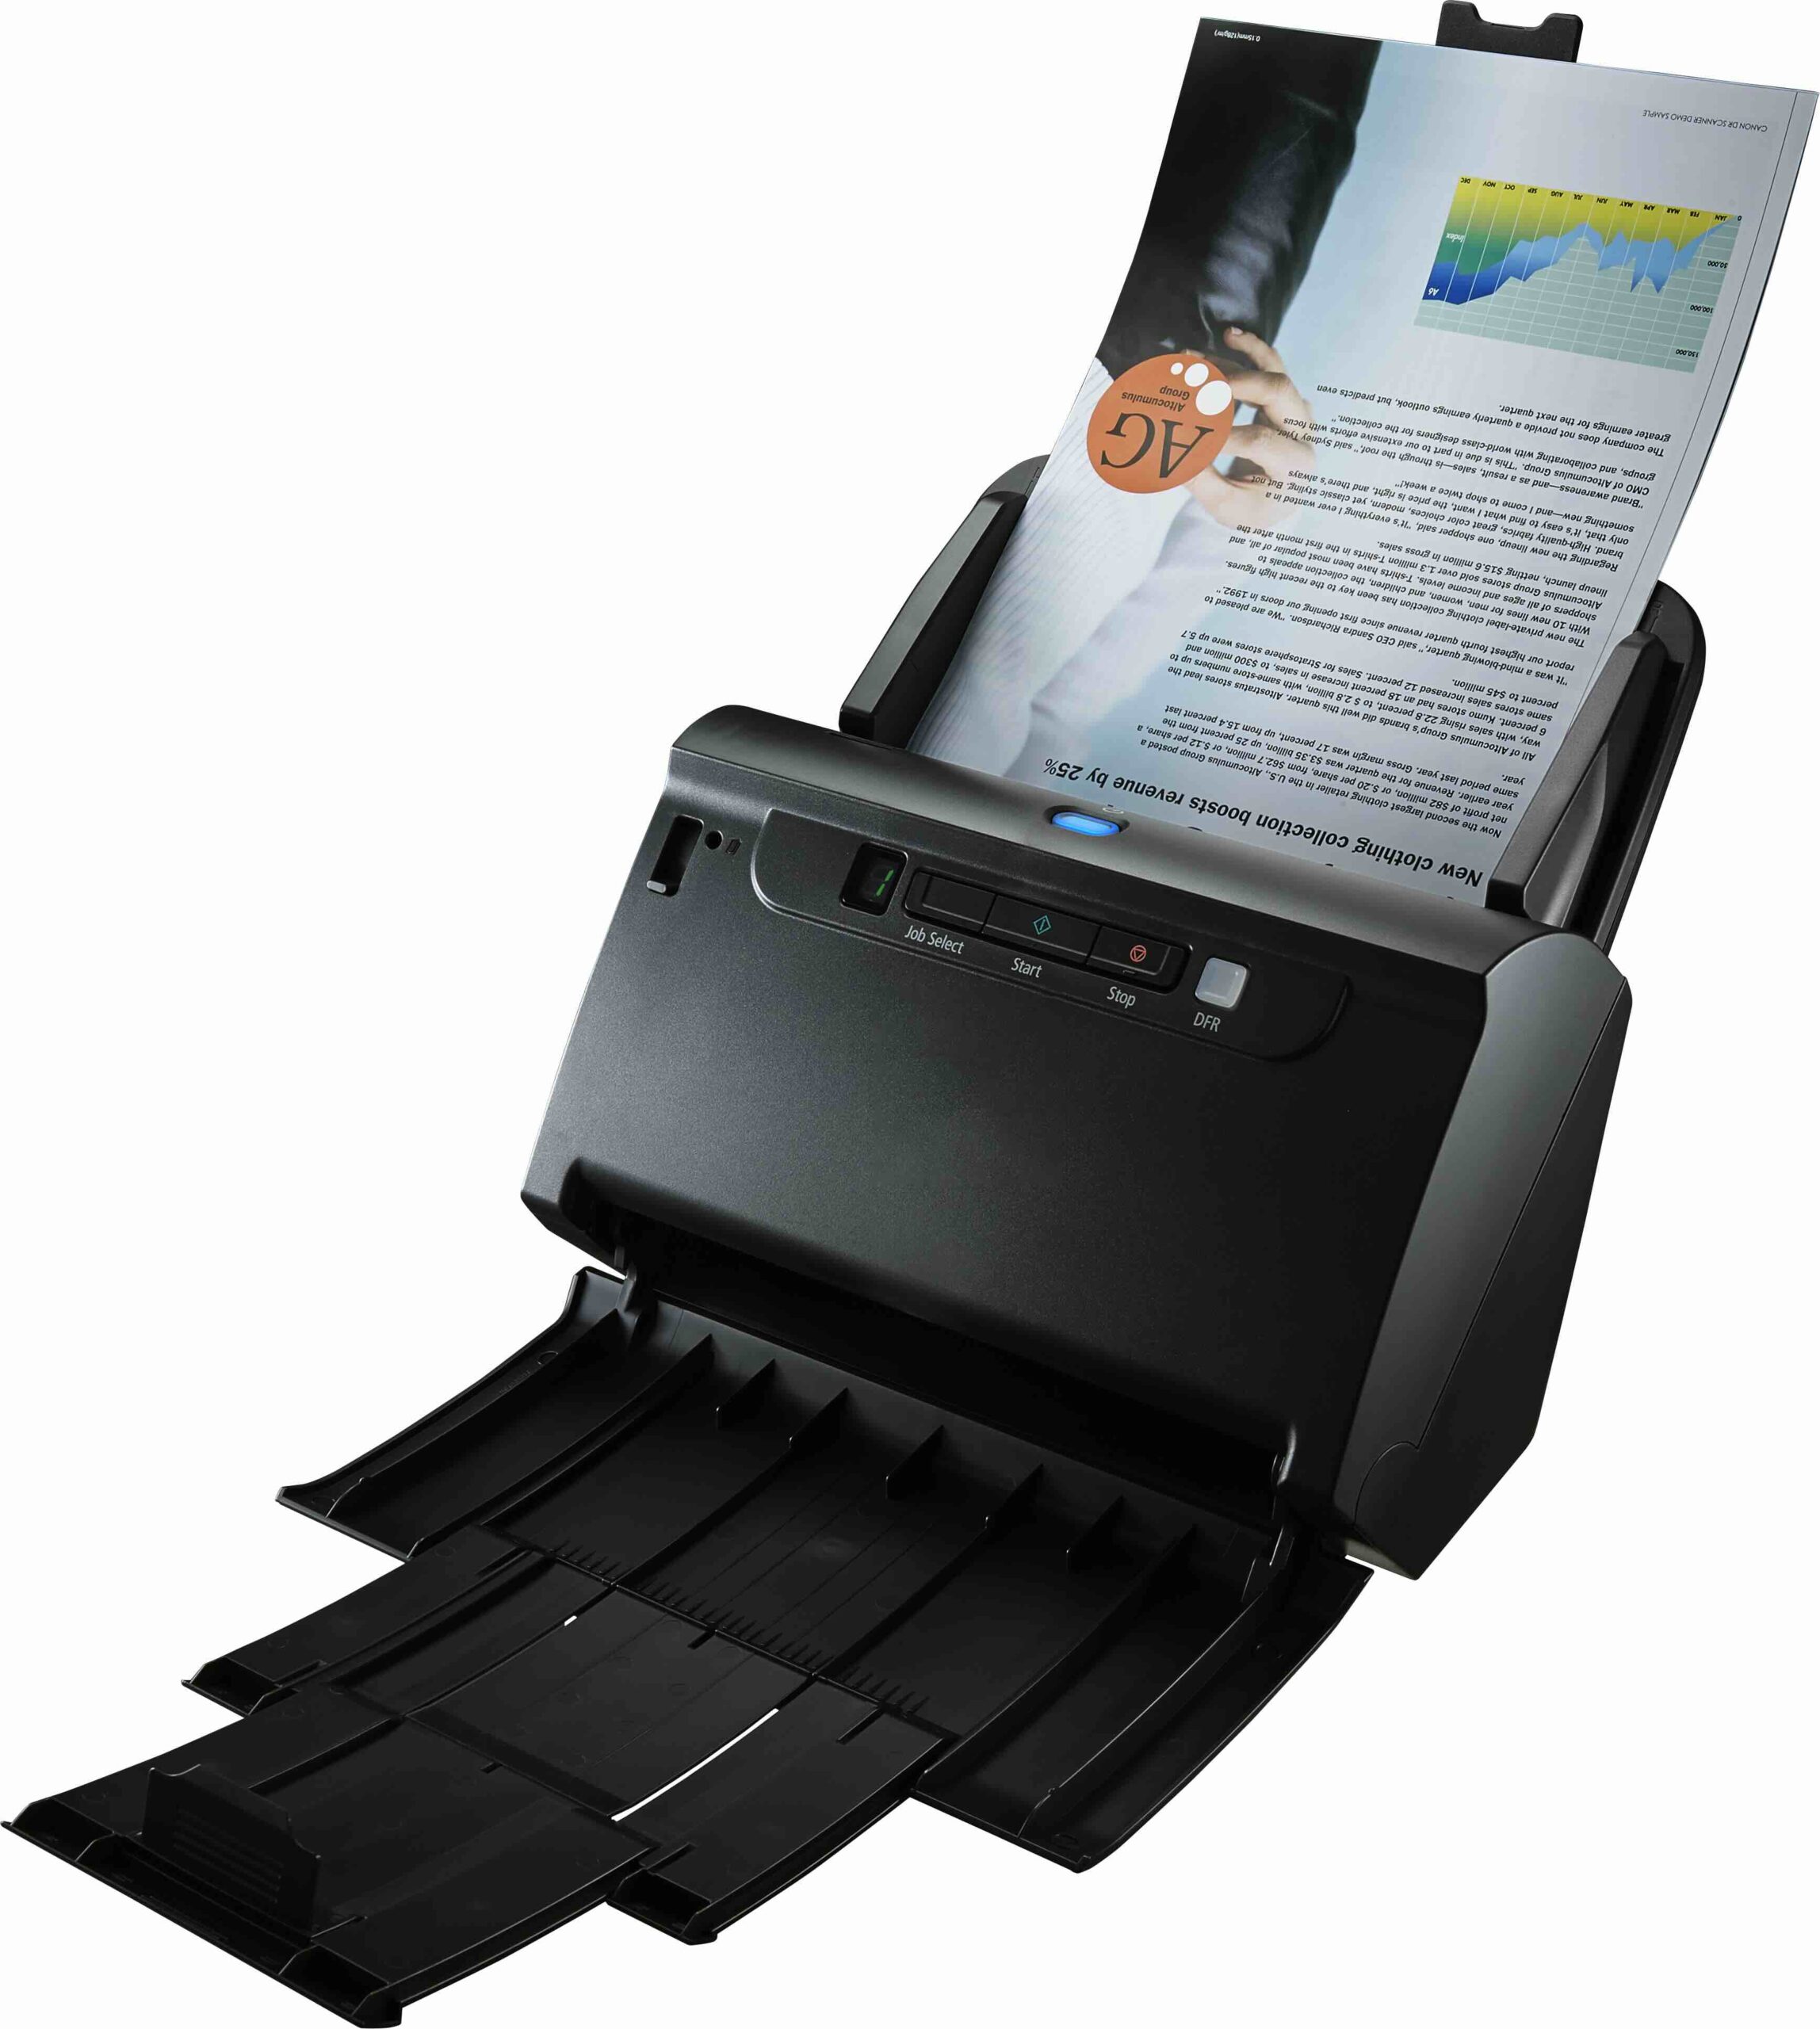 Featured image for “Powerful Desktop Scanner from Canon”